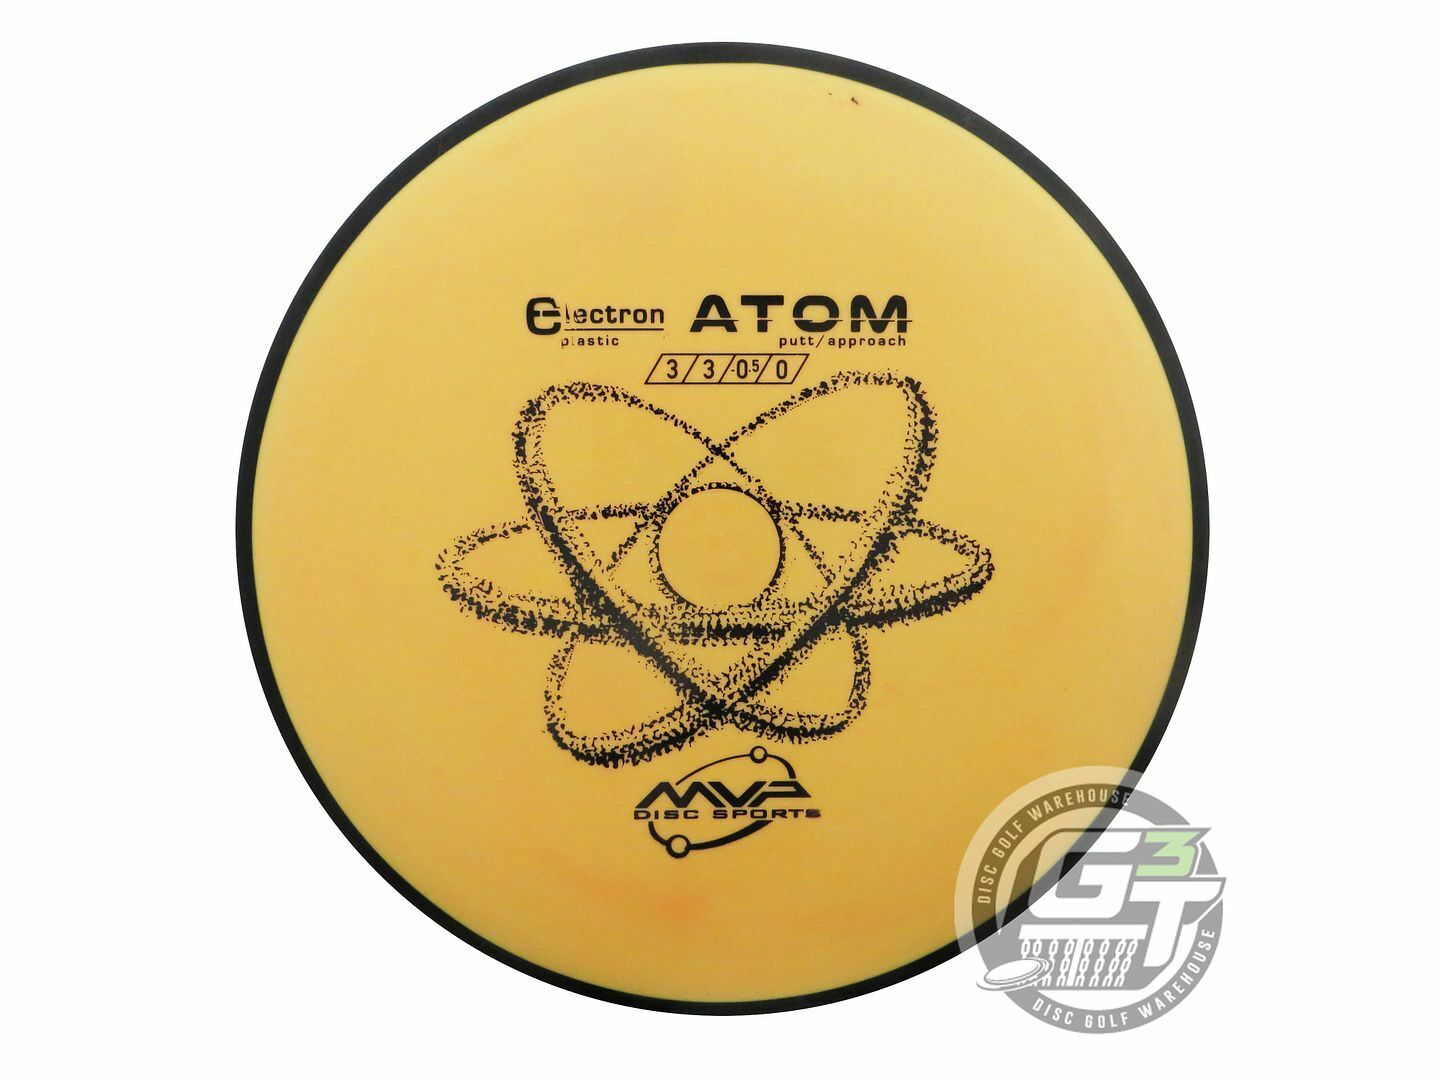 MVP Electron Atom Putter Golf Disc (Individually Listed)